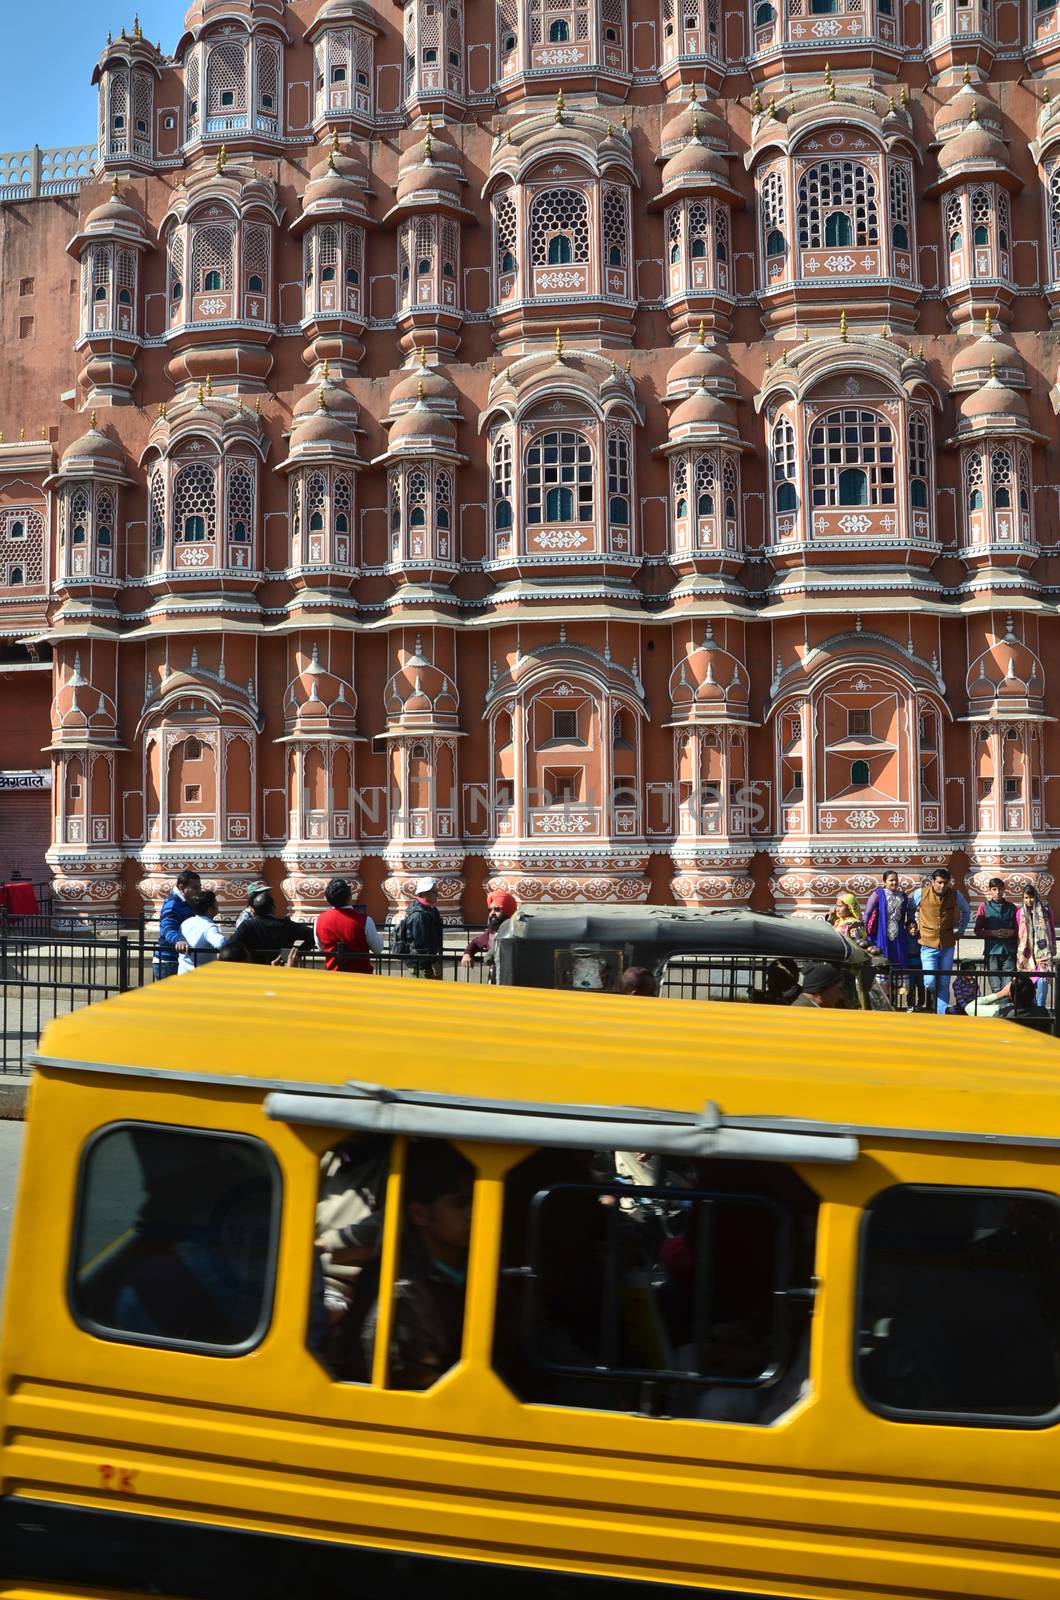 Jaipur, India - December 29, 2014: Unidentified tourists visit Hawa Mahal (Palace of winds), UNESCO World Heritage on December 29, 2014 in Jaipur, Rajasthan, India